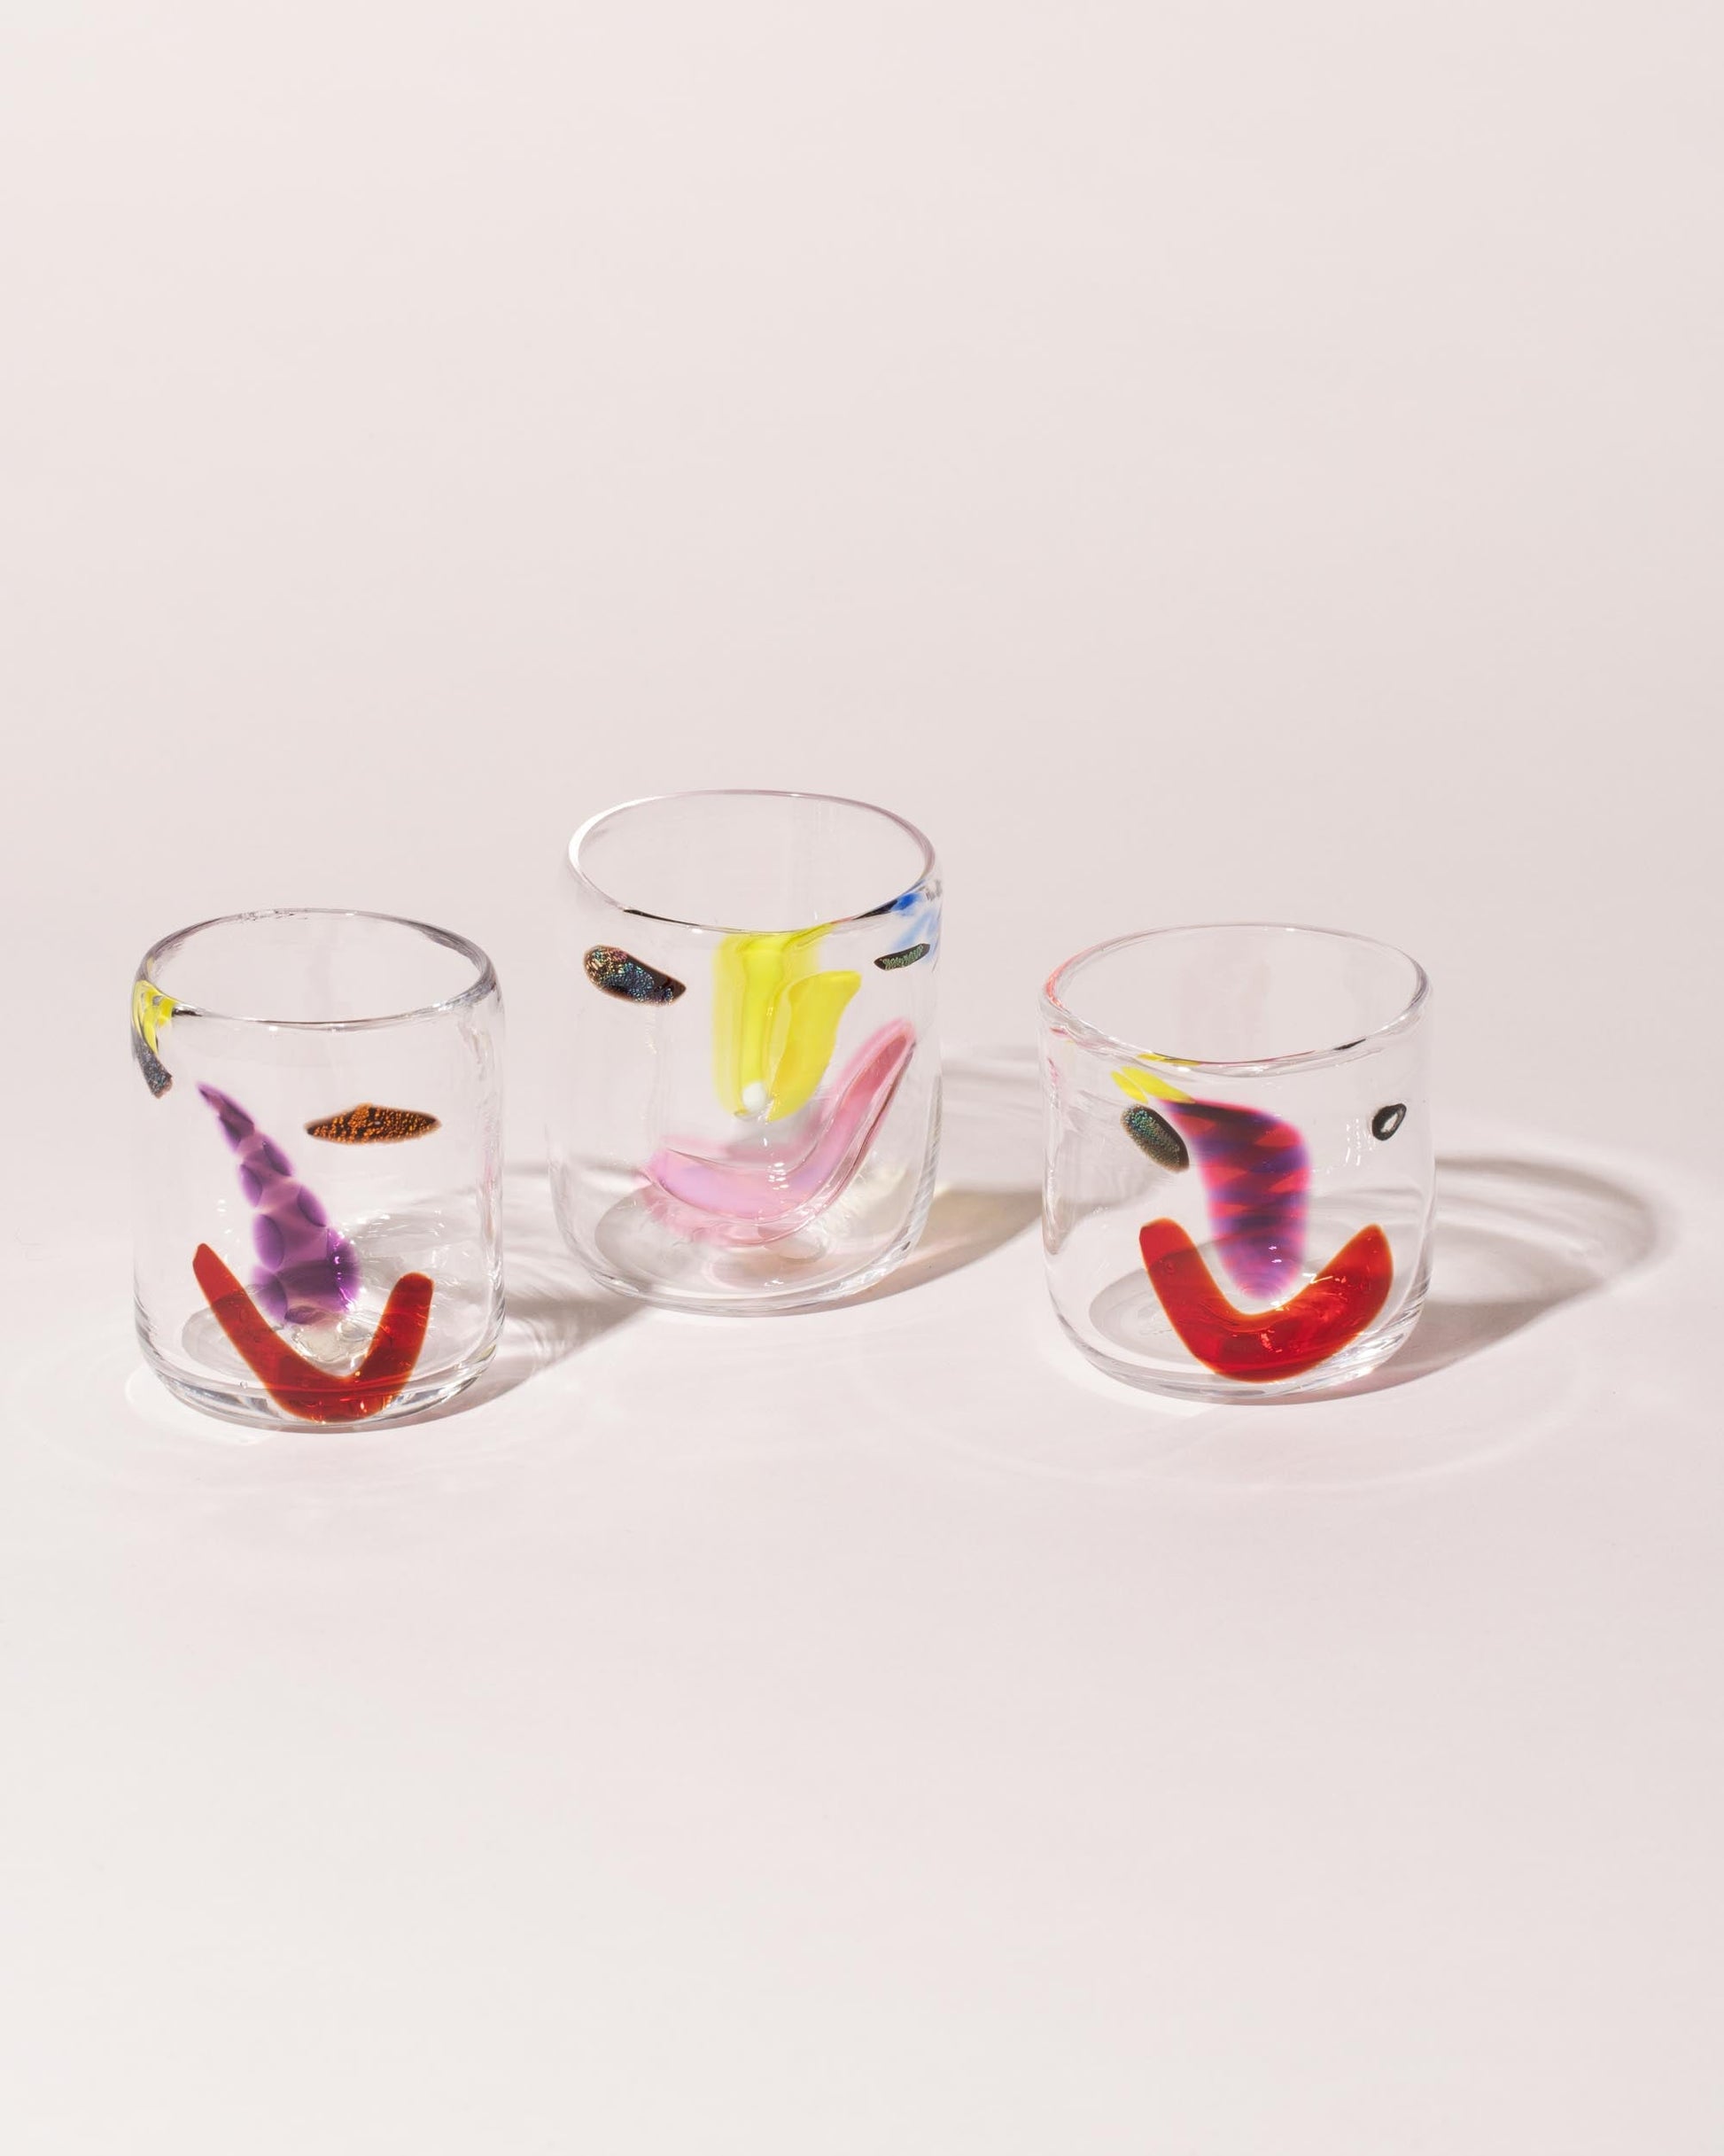 Group of FACEVESSEL Medium Face Glasses on light color background.